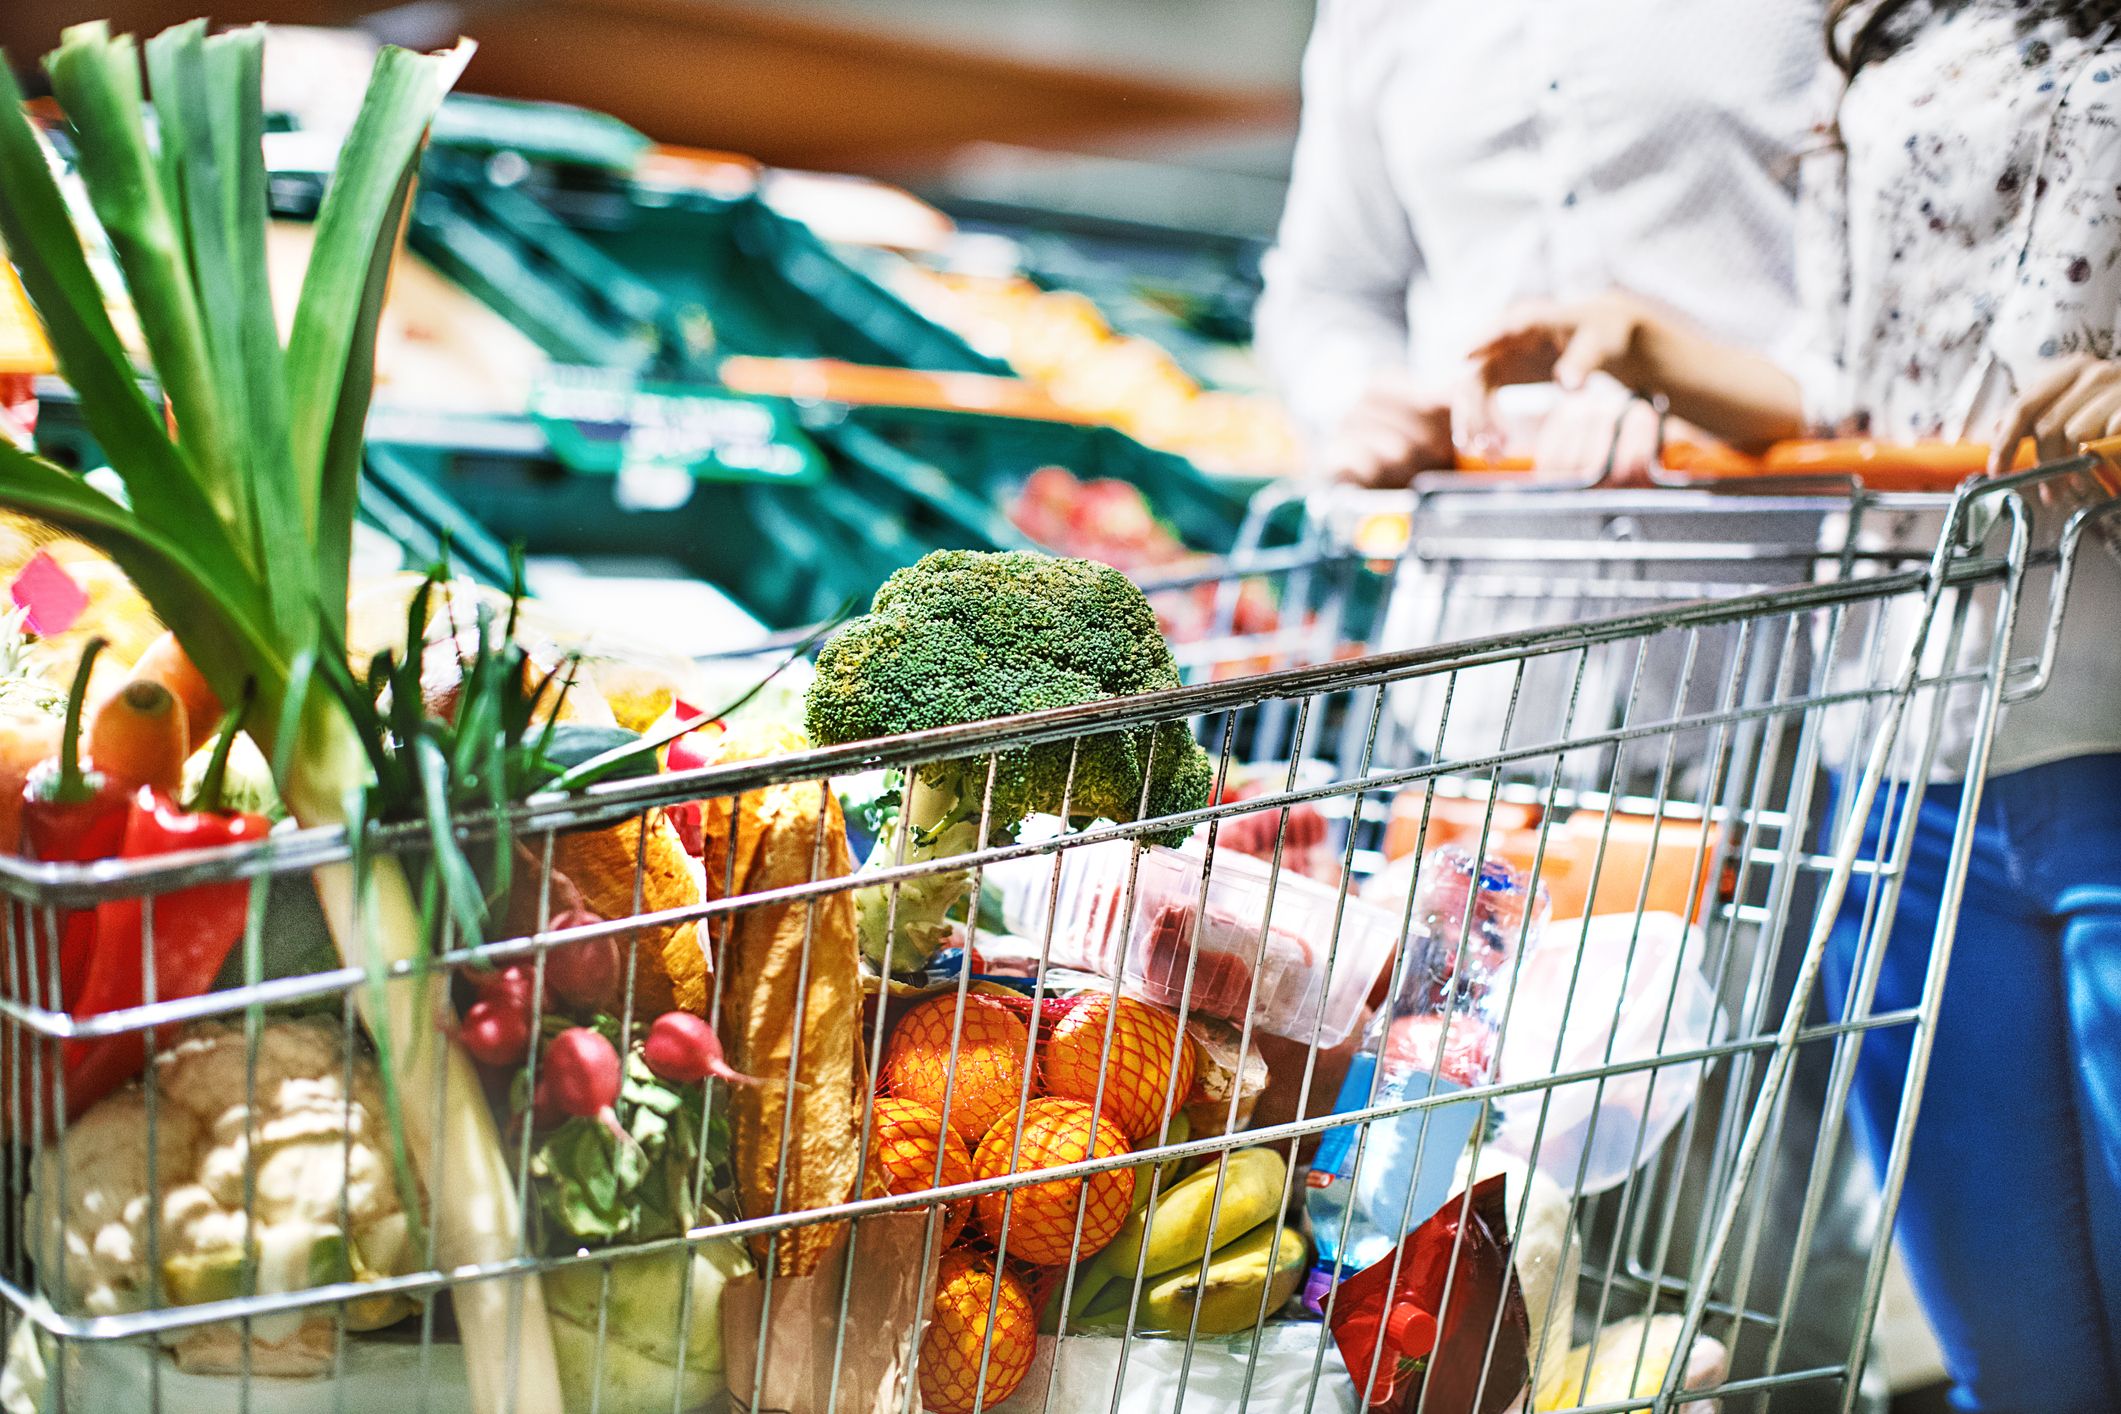 The 10 Healthiest Grocery Stores In The U.S., Per Nutritionists